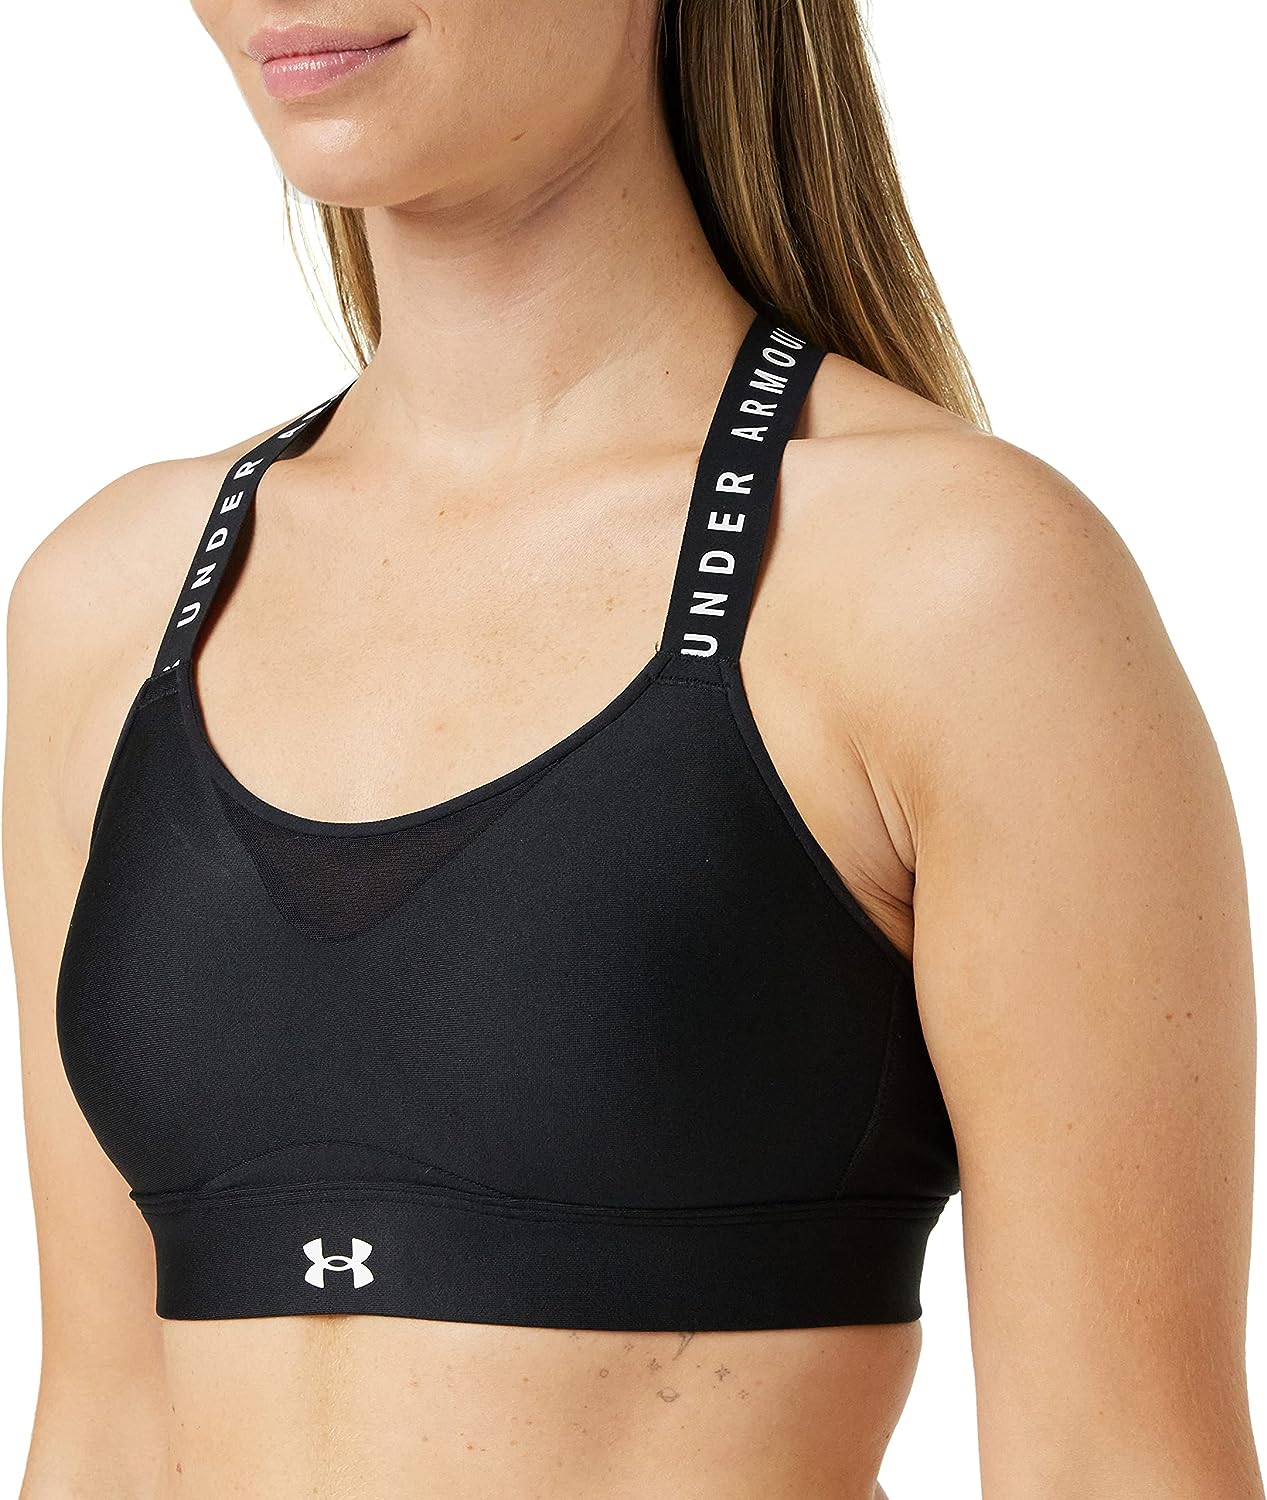 Read more about the article Under Armour Women’s UA Infinity High Sports Bra Review